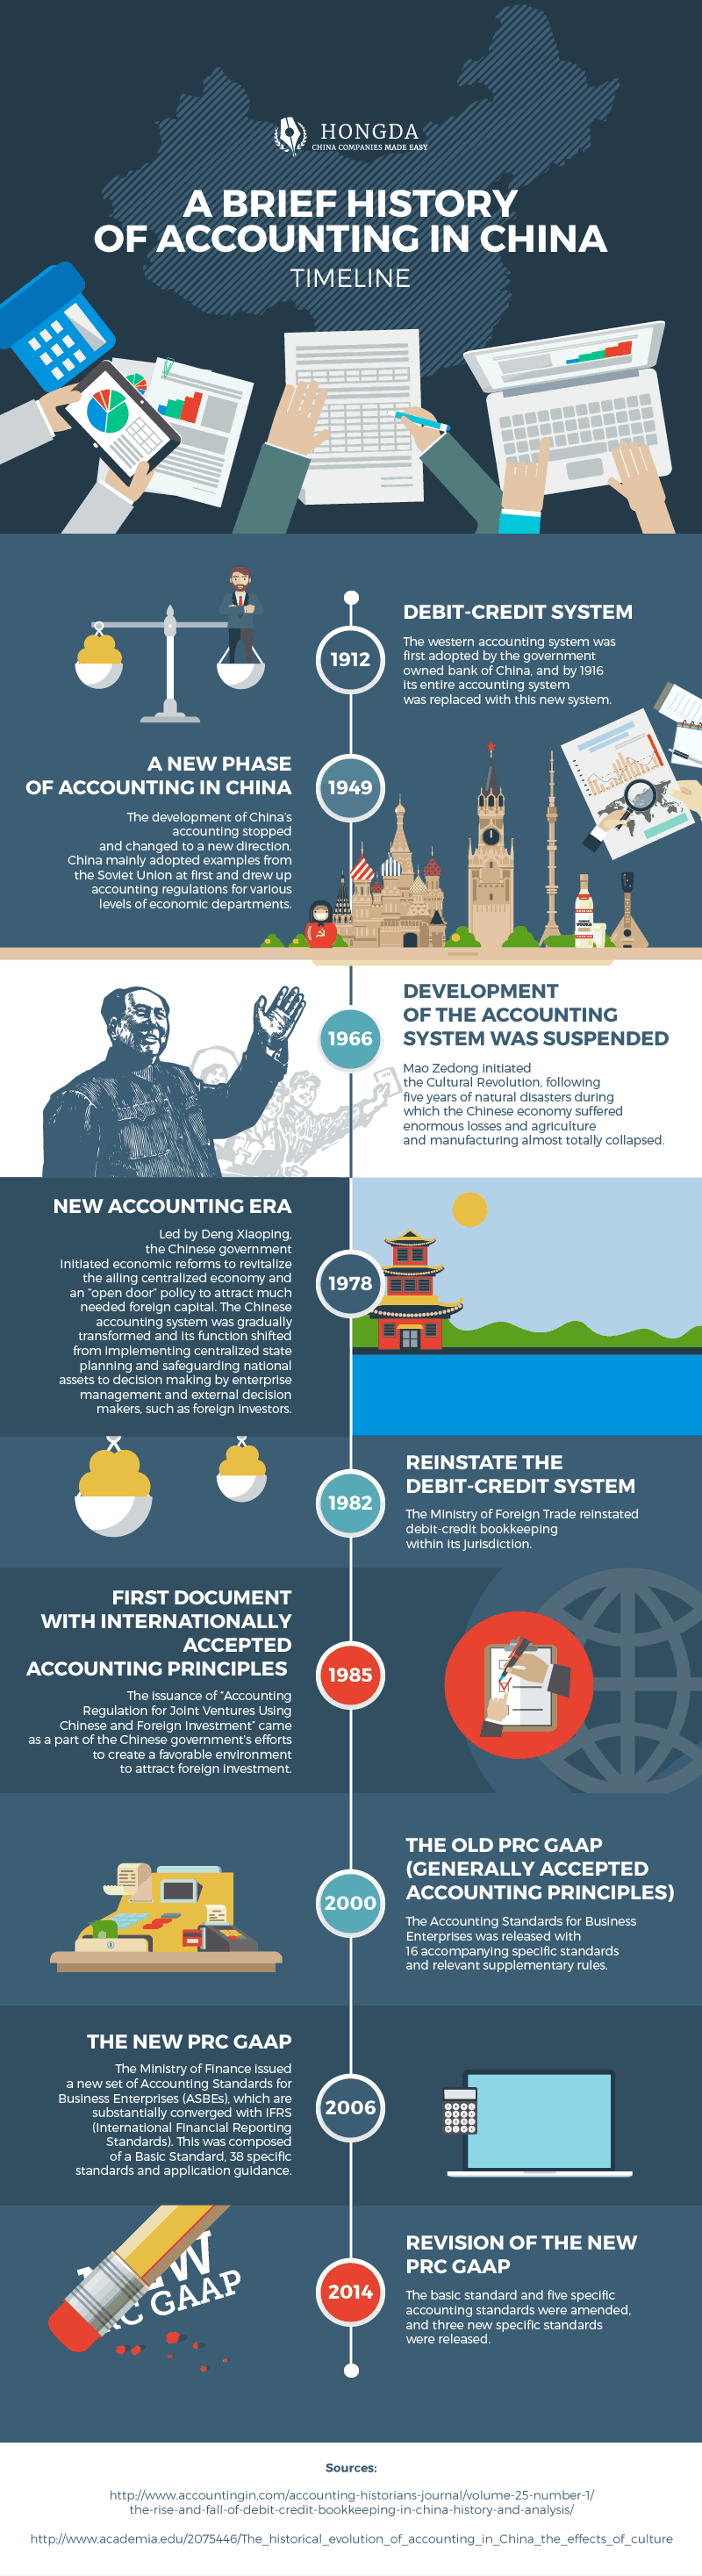 A History Of China Accounting Over The Years Timeline Infographic